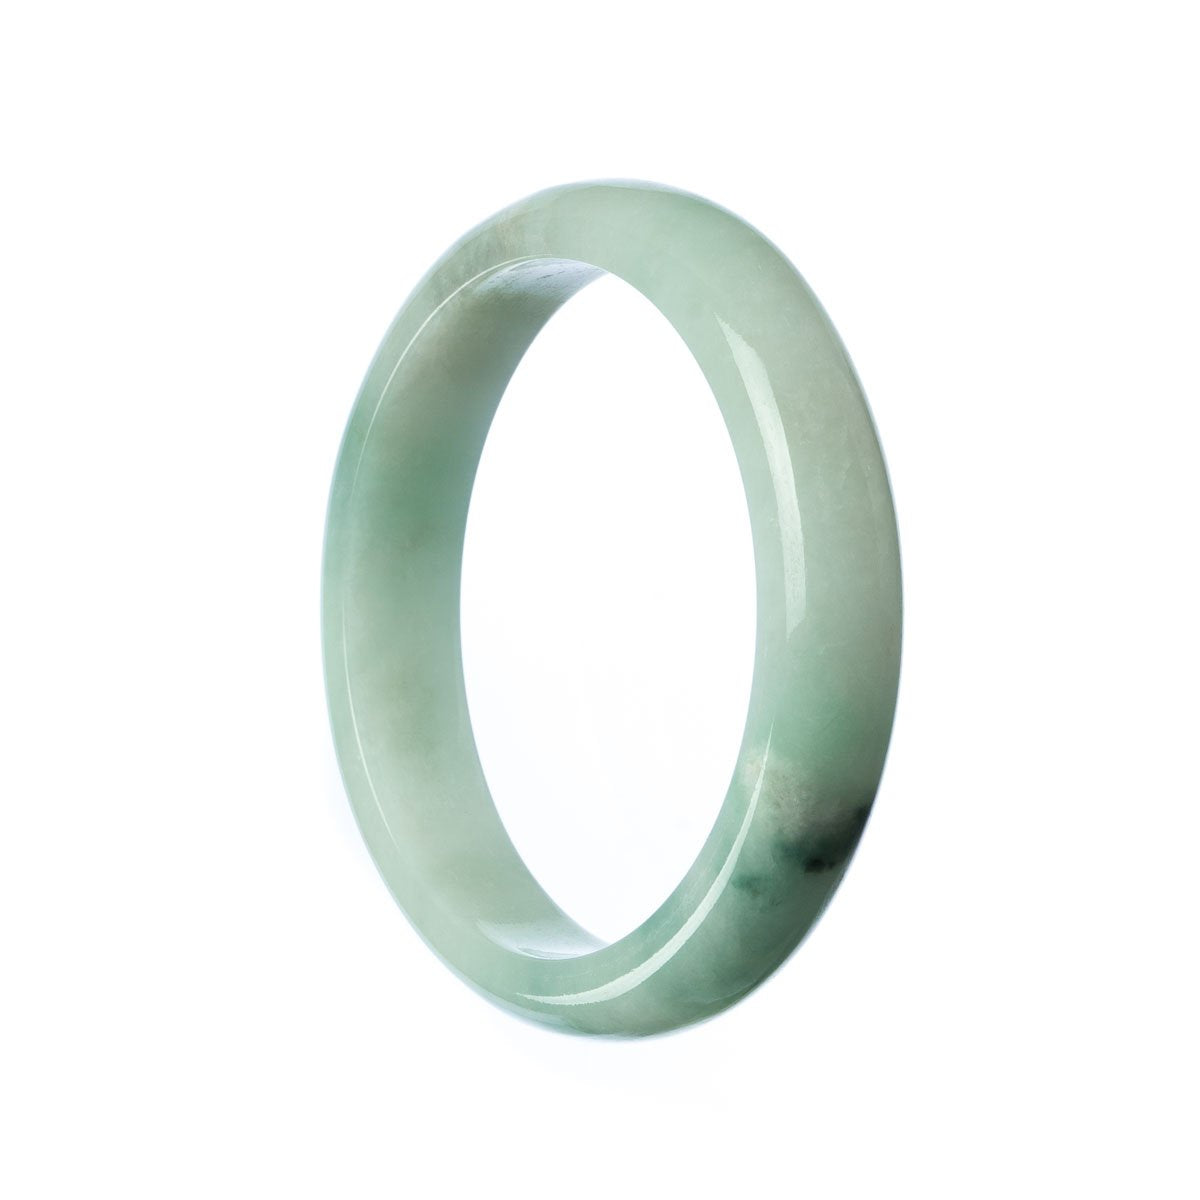 A close-up image of a pale green jade bracelet in the shape of a half moon. The high-quality jade has a smooth texture and a vibrant color. The bracelet measures 55mm in diameter and is perfect for adding a touch of elegance to any outfit. Designed by MAYS.